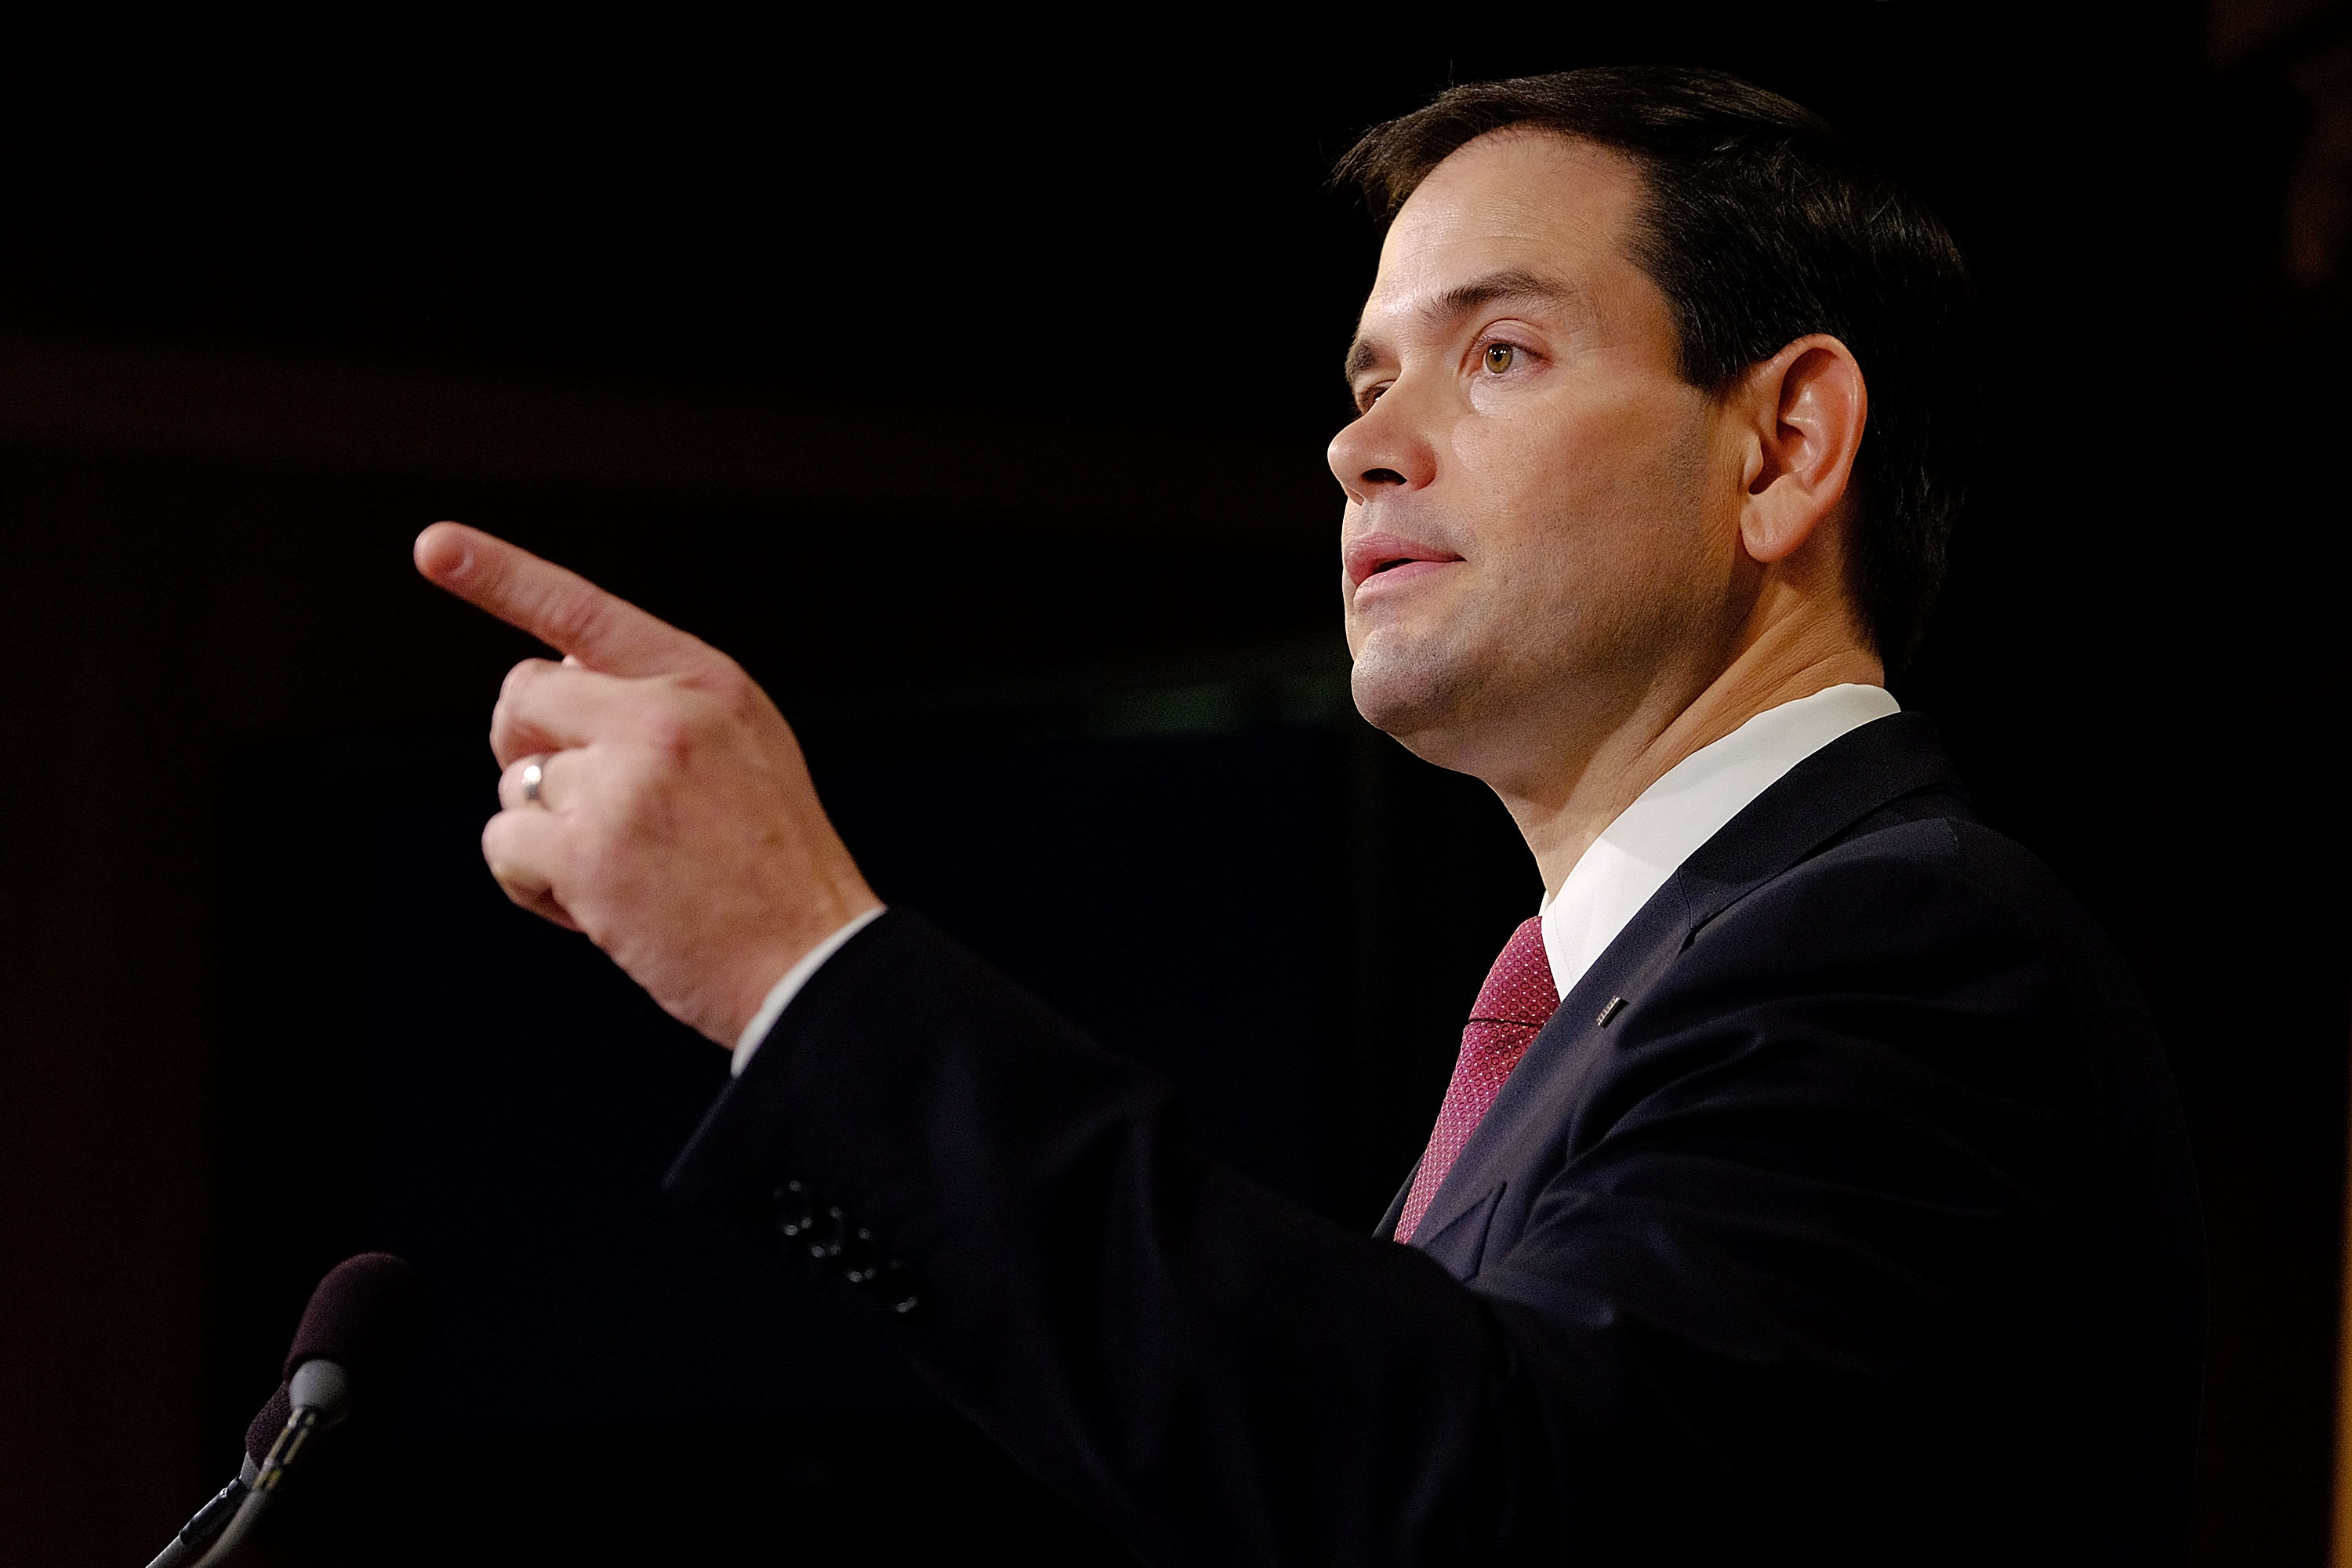 Sen. Marco Rubio (R-FL) reacts to U.S. President Barack Obama's announcement about revising policies on U.S.-Cuba relations on December 17, 2014 in Washington, DC. (T.J. Kirkpatrick&mdash;Getty Images)